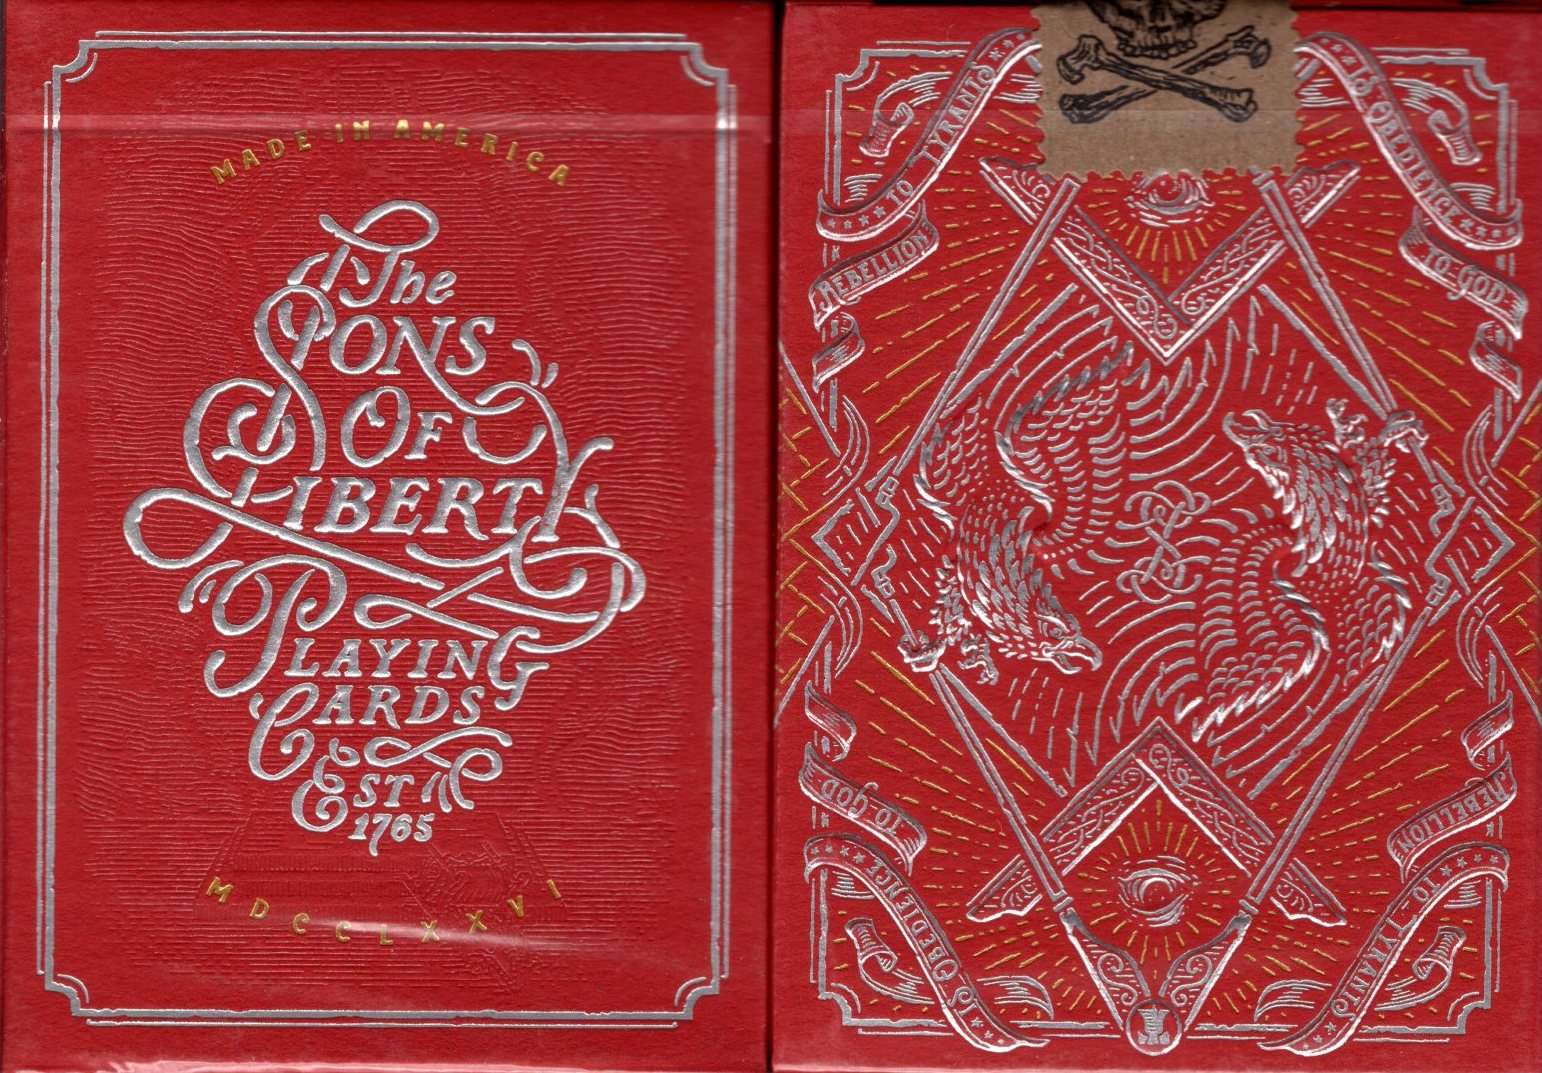 PlayingCardDecks.com-Sons of Liberty Patriot Red Playing Cards USPCC